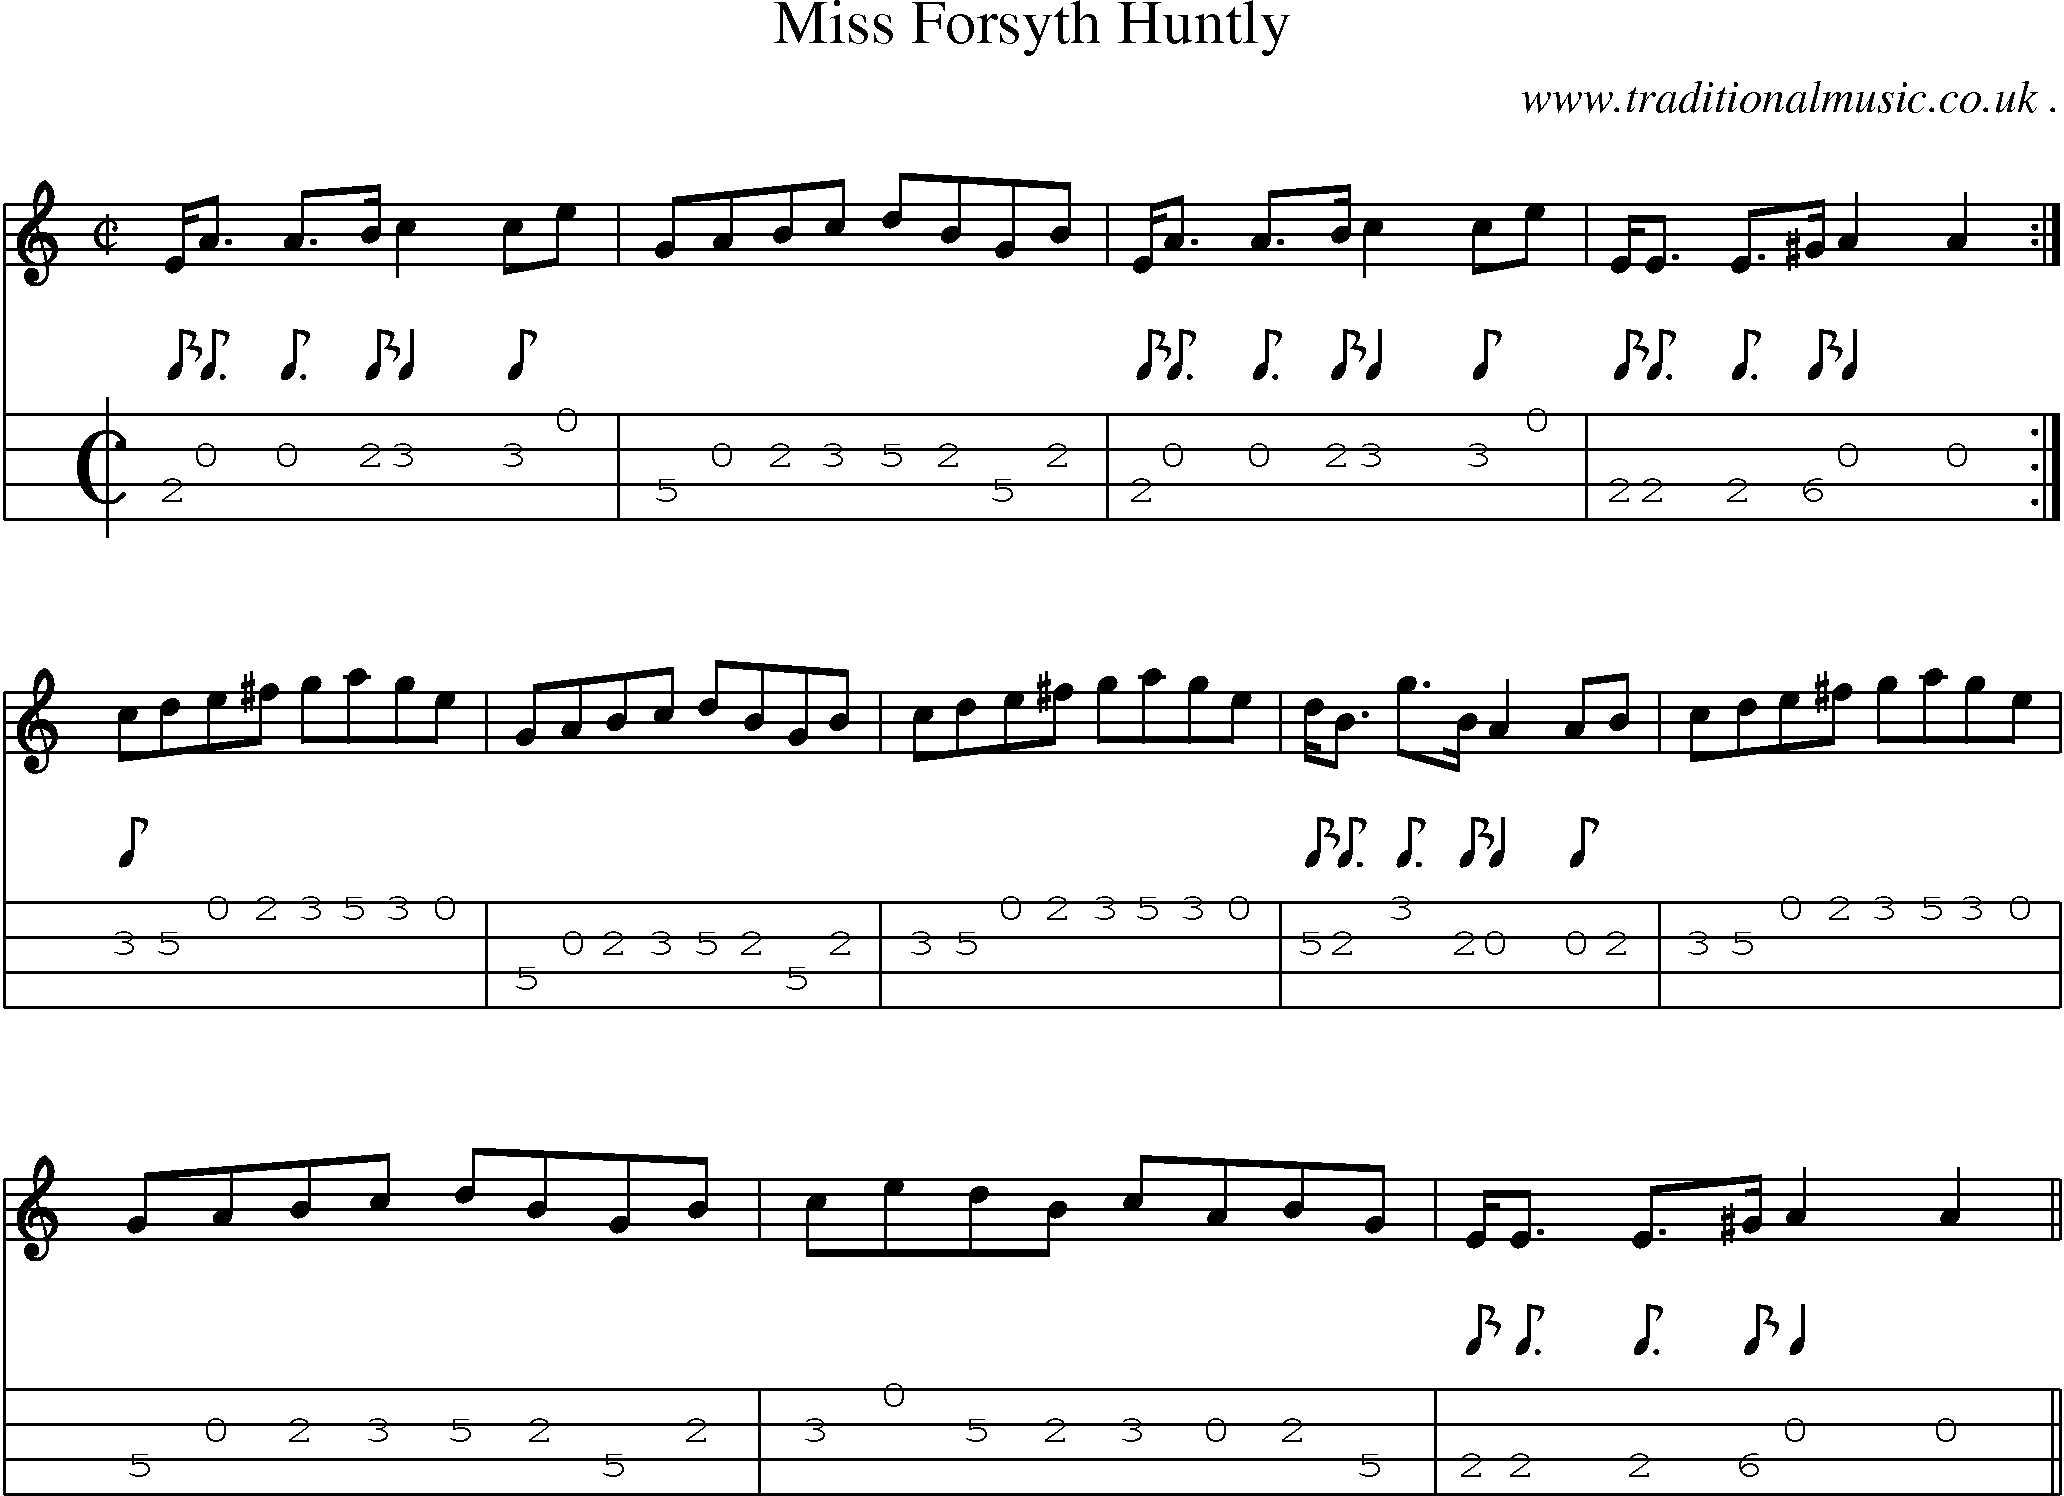 Sheet-music  score, Chords and Mandolin Tabs for Miss Forsyth Huntly